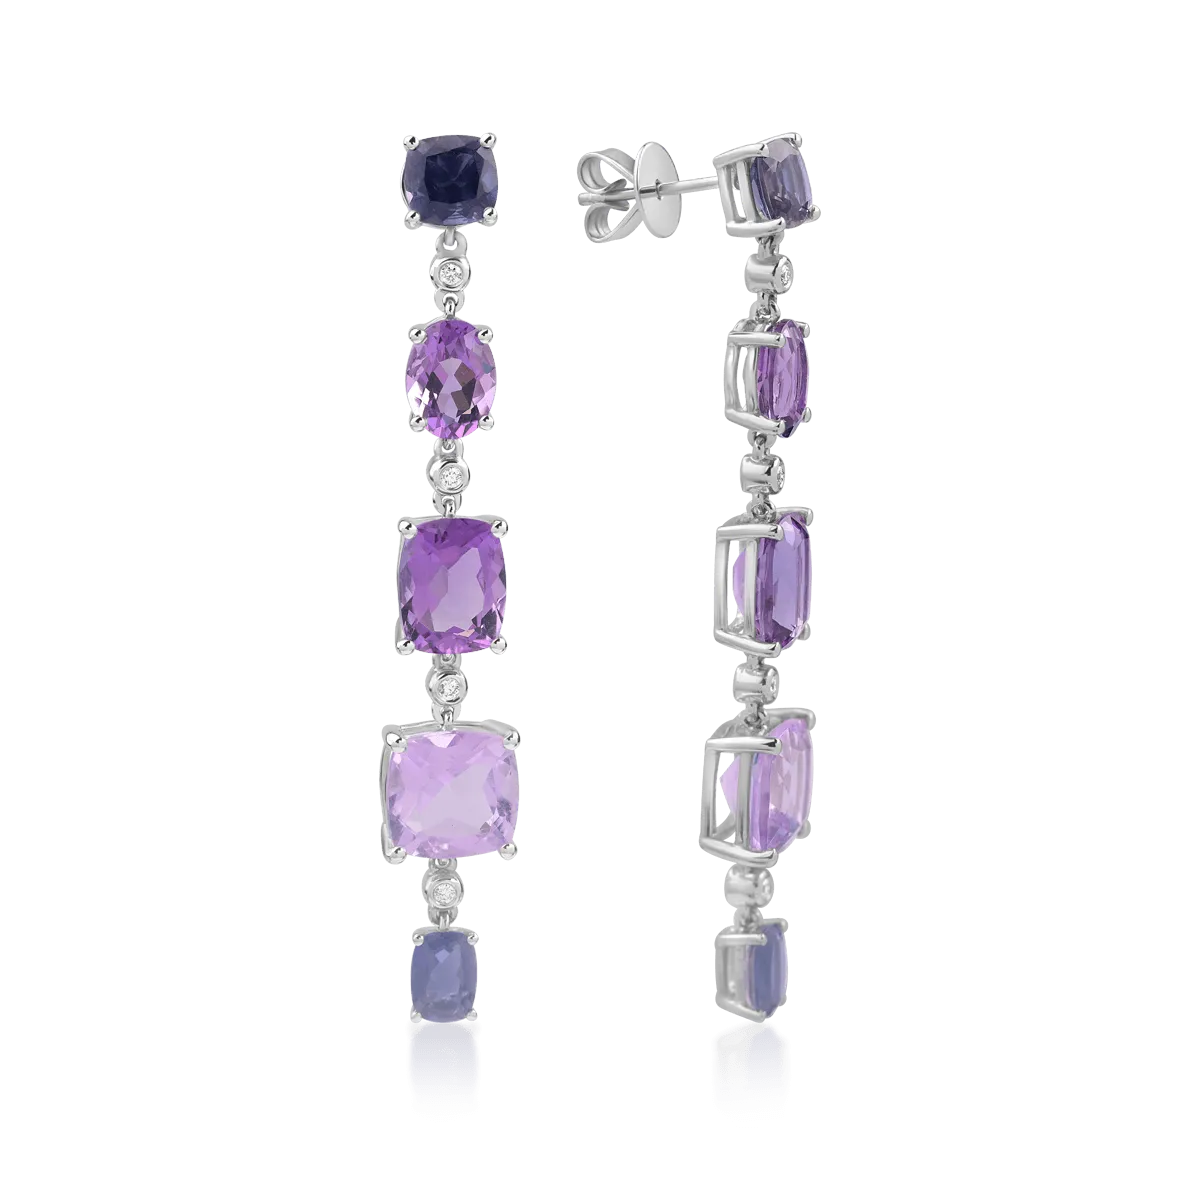 18K white gold earrings with 14.7ct precious and semiprecious stones